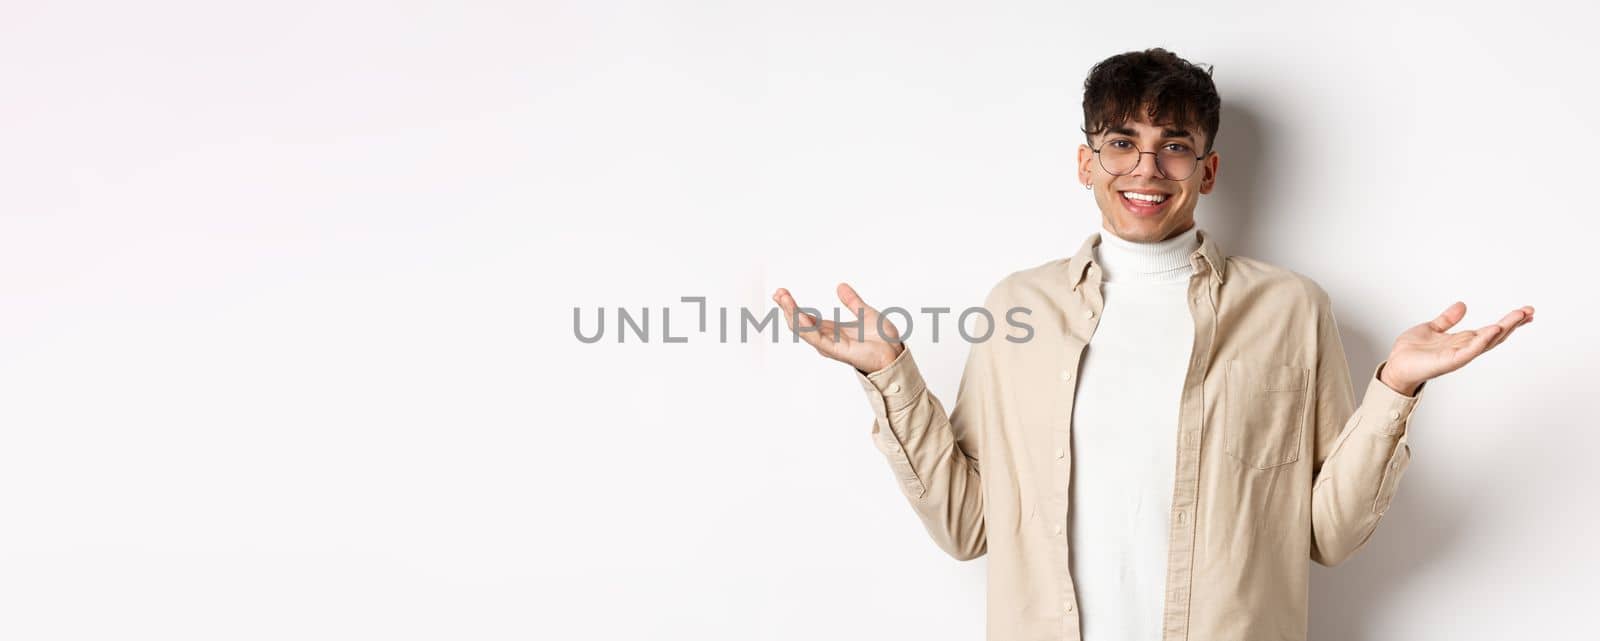 Portrait of happy and pleased young man spread hands sideways and smiling friendly, looking satisfied, standing in glasses on white background.